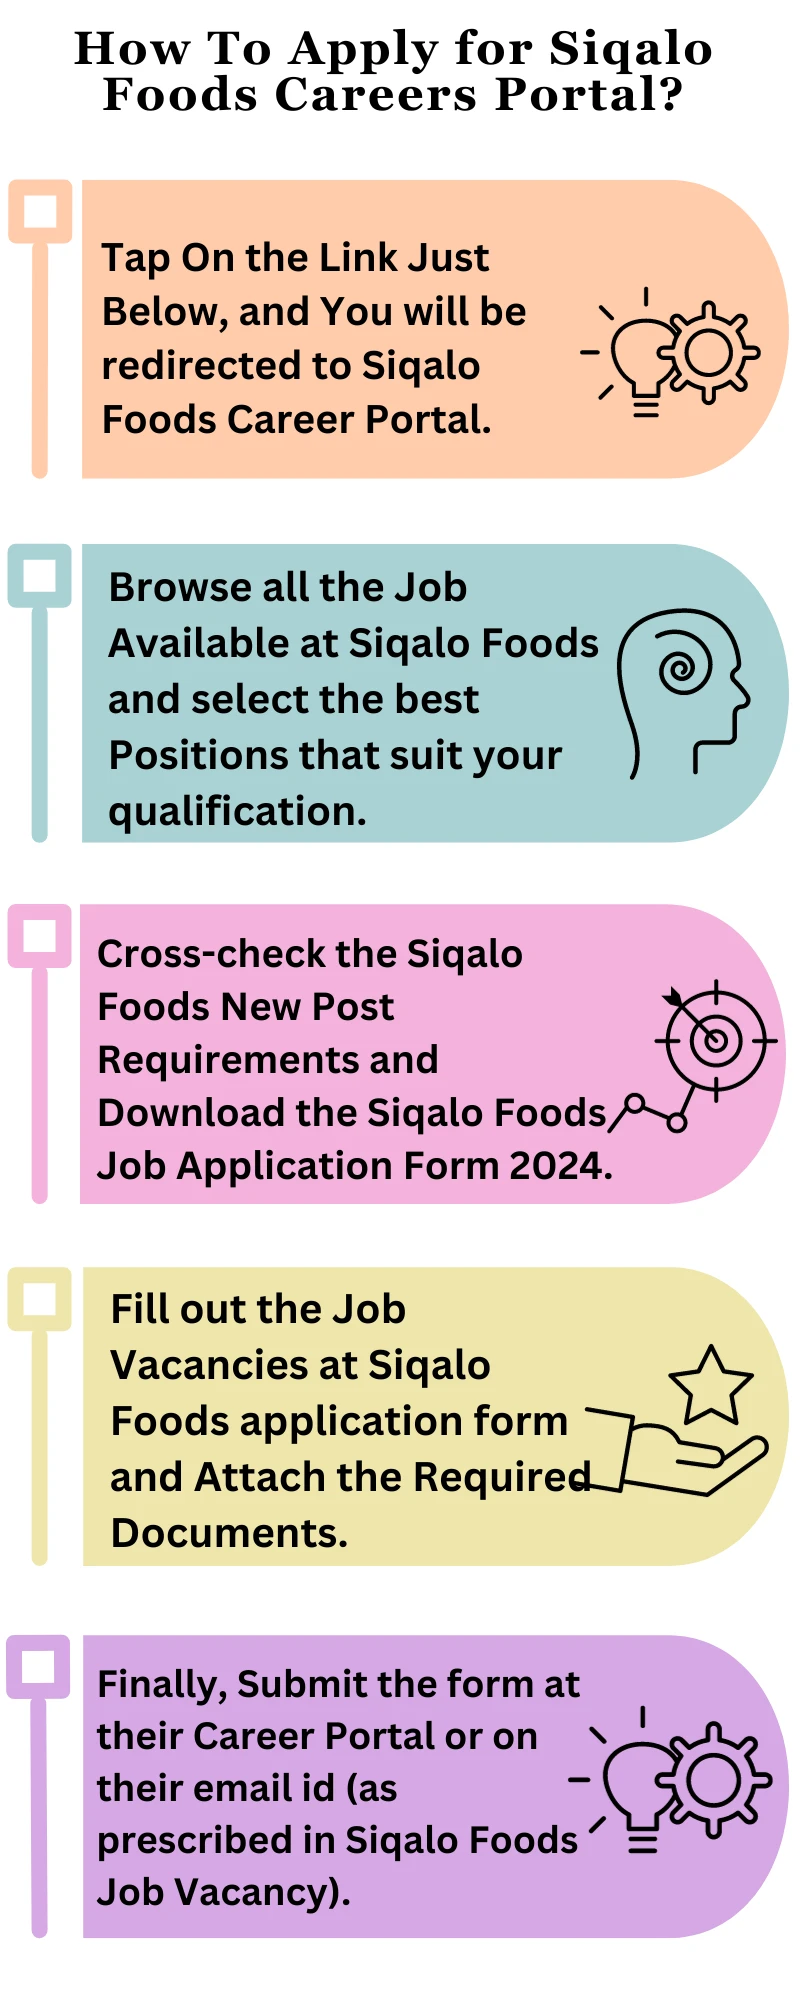 How To Apply for Siqalo Foods Careers Portal?